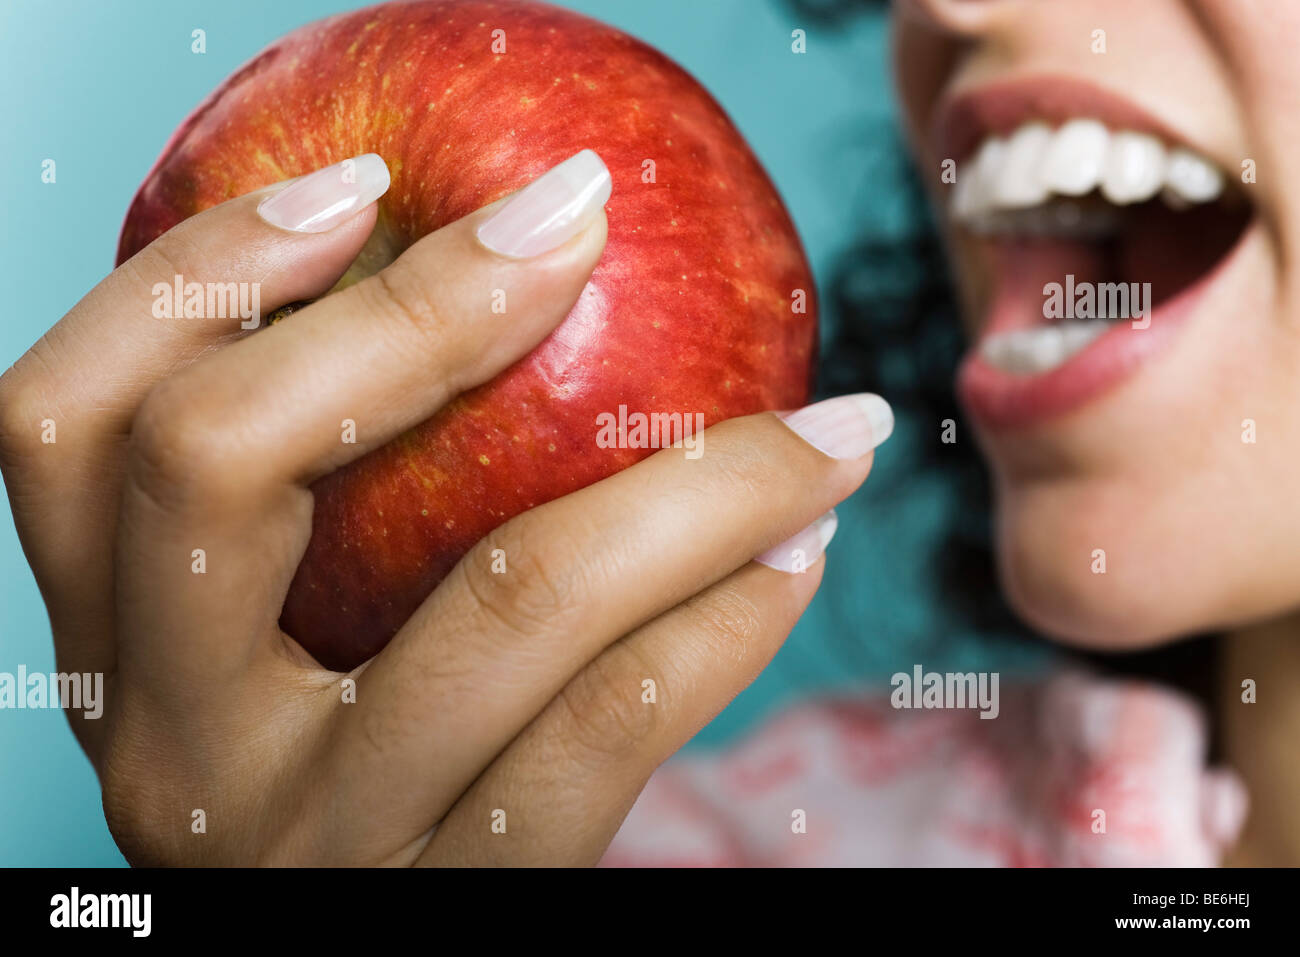 Woman eating apple, close-up Stock Photo